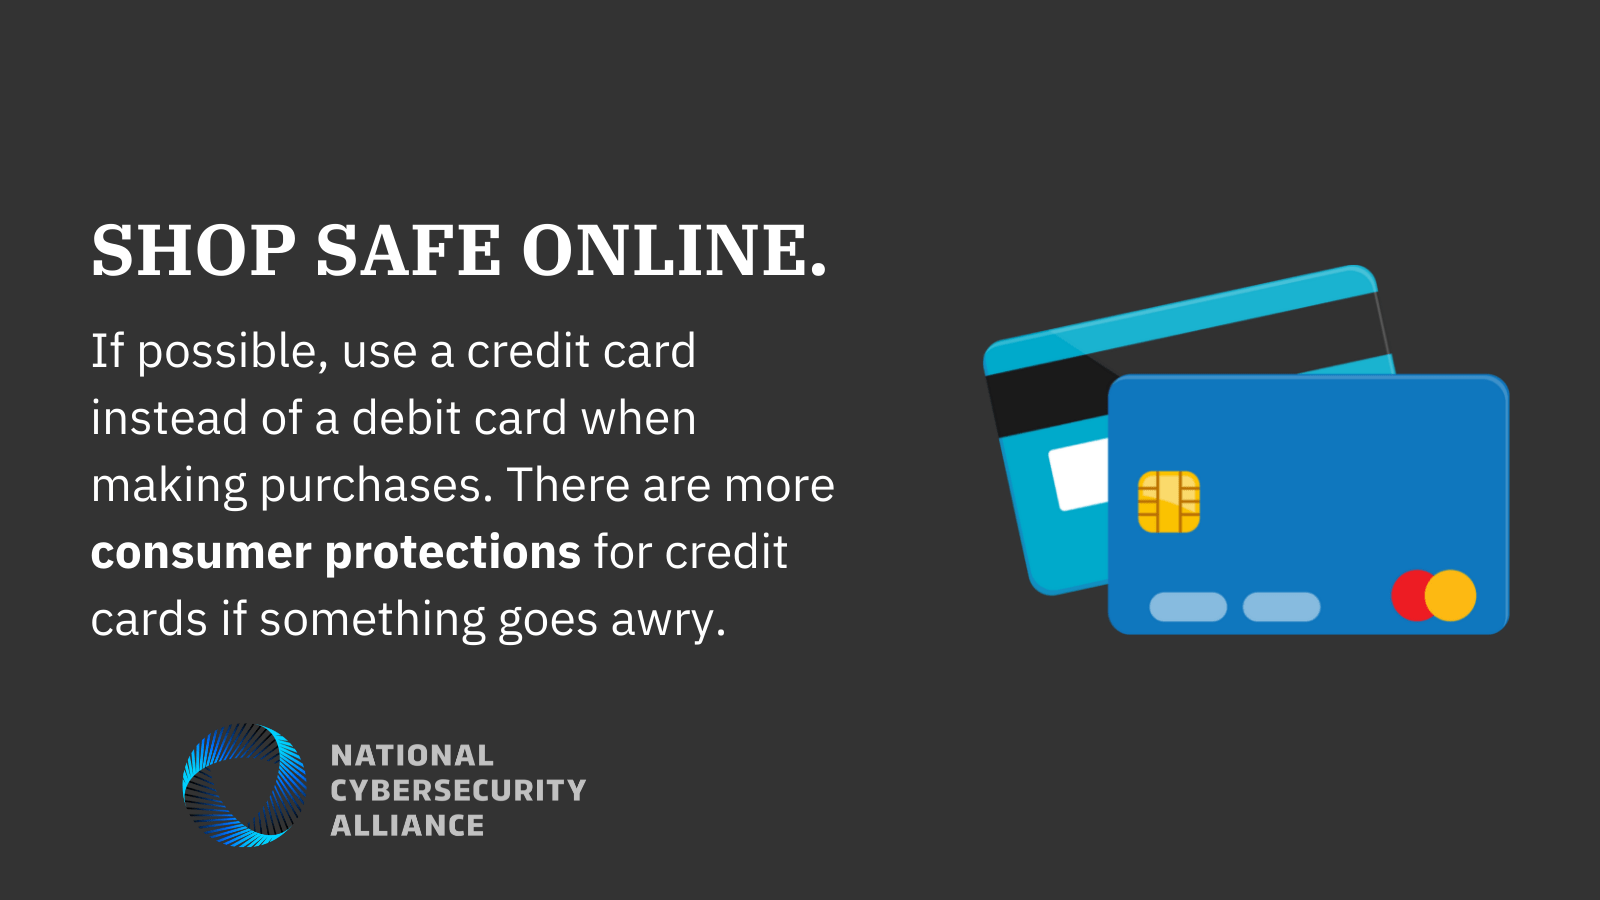 Shop safe online. If possible use a credit card instead of a debit card when making purchases. There are more consumer protections for credit cards if something goes awry.